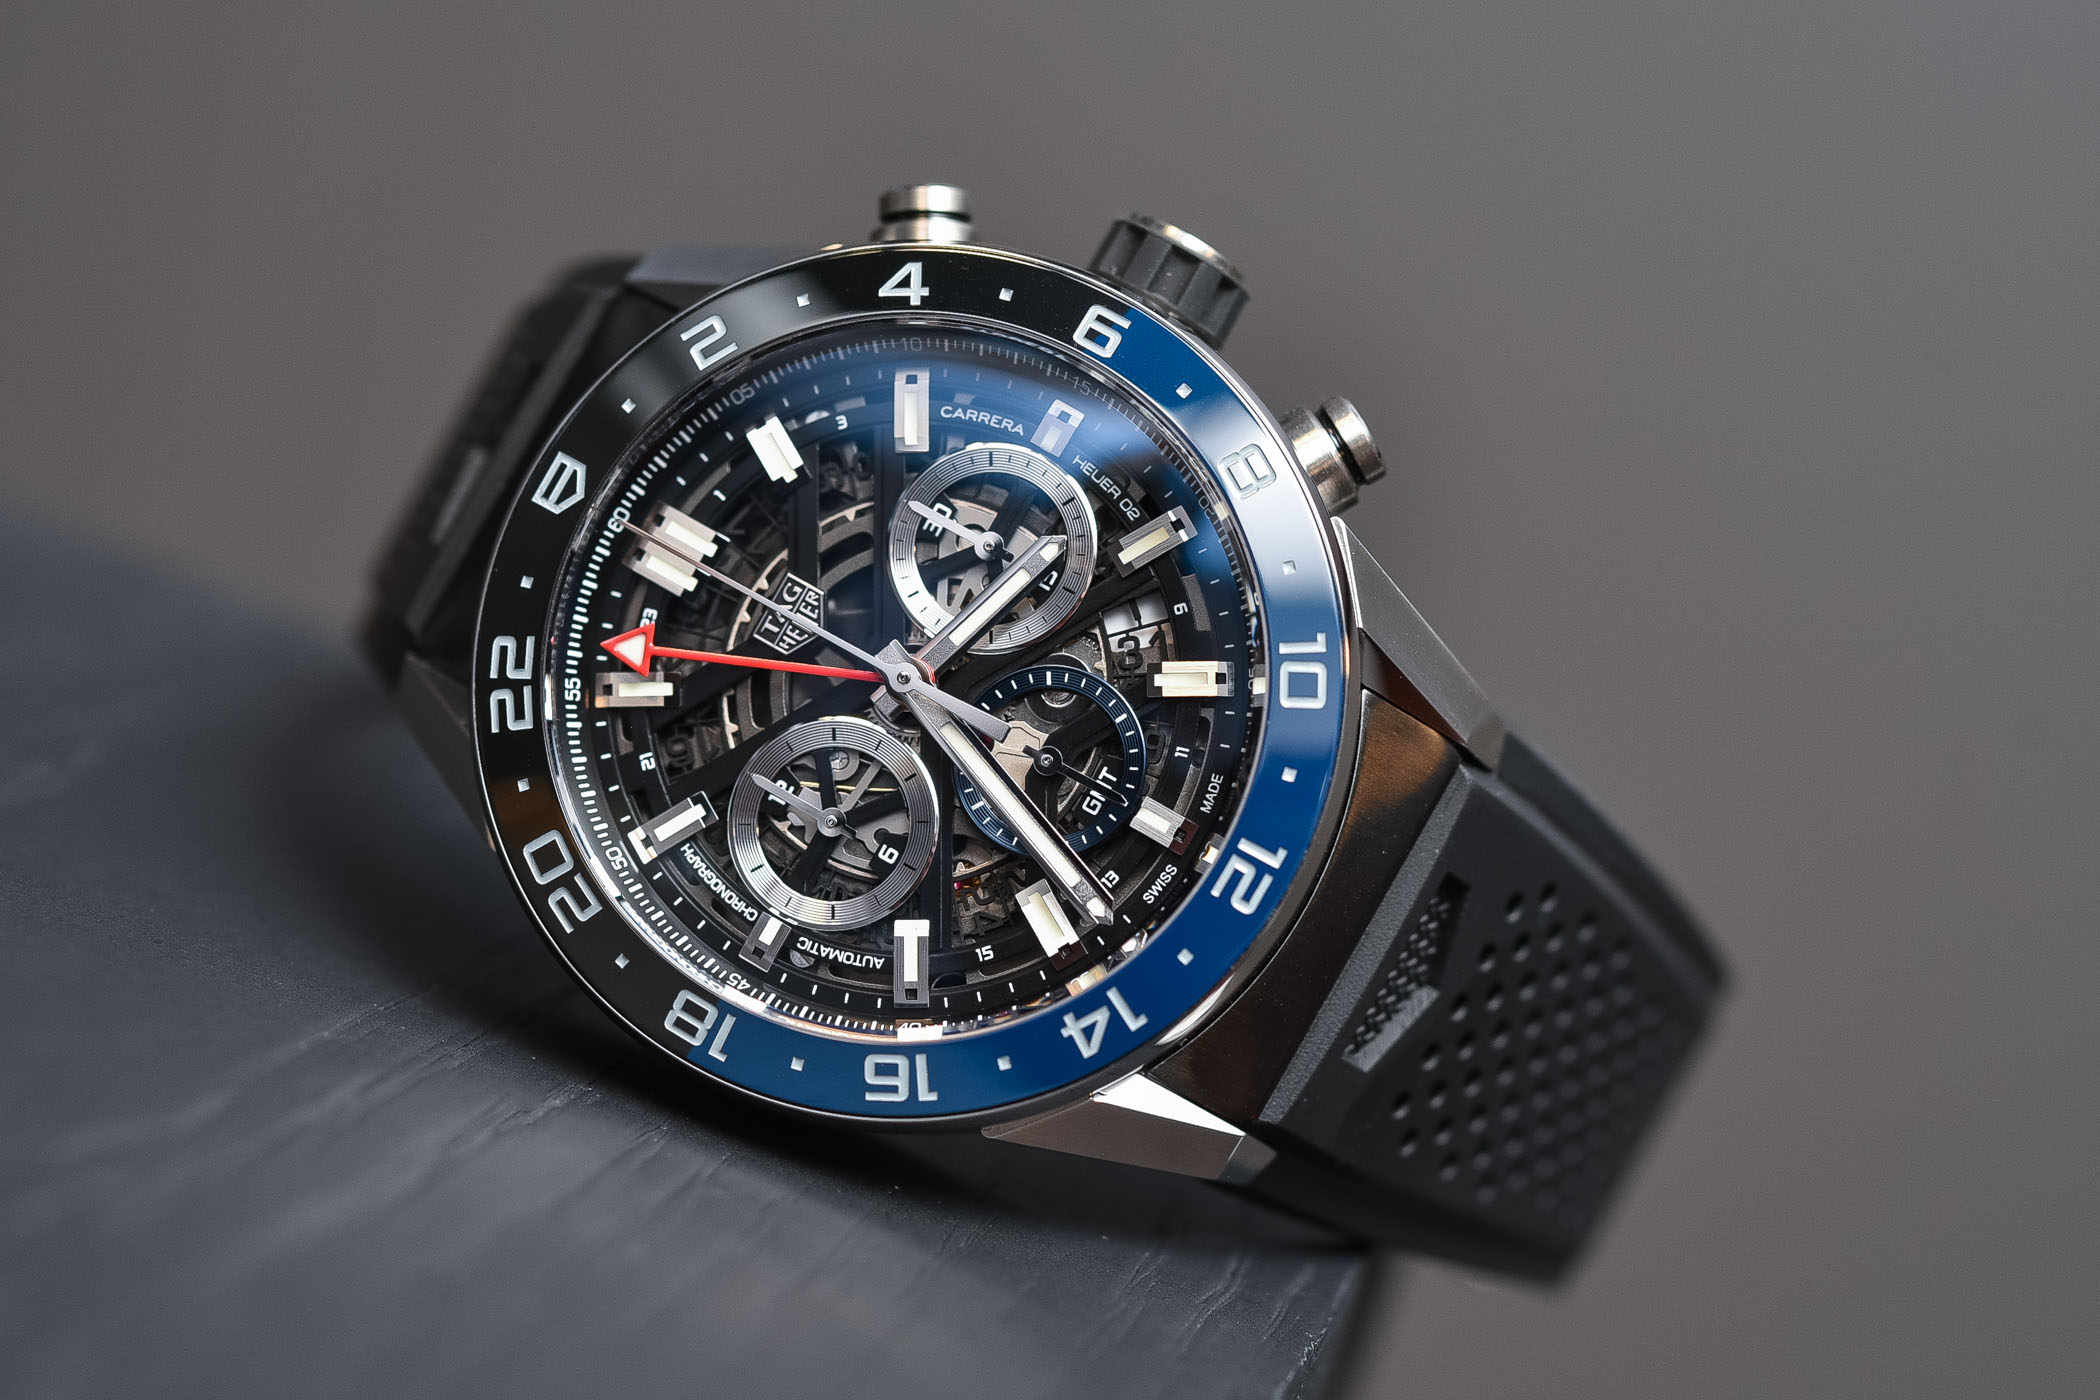 Best GMT Travellers watches Baselworld 2018 - TAG Heuer Carrera Heuer 02 GMT Chronograph